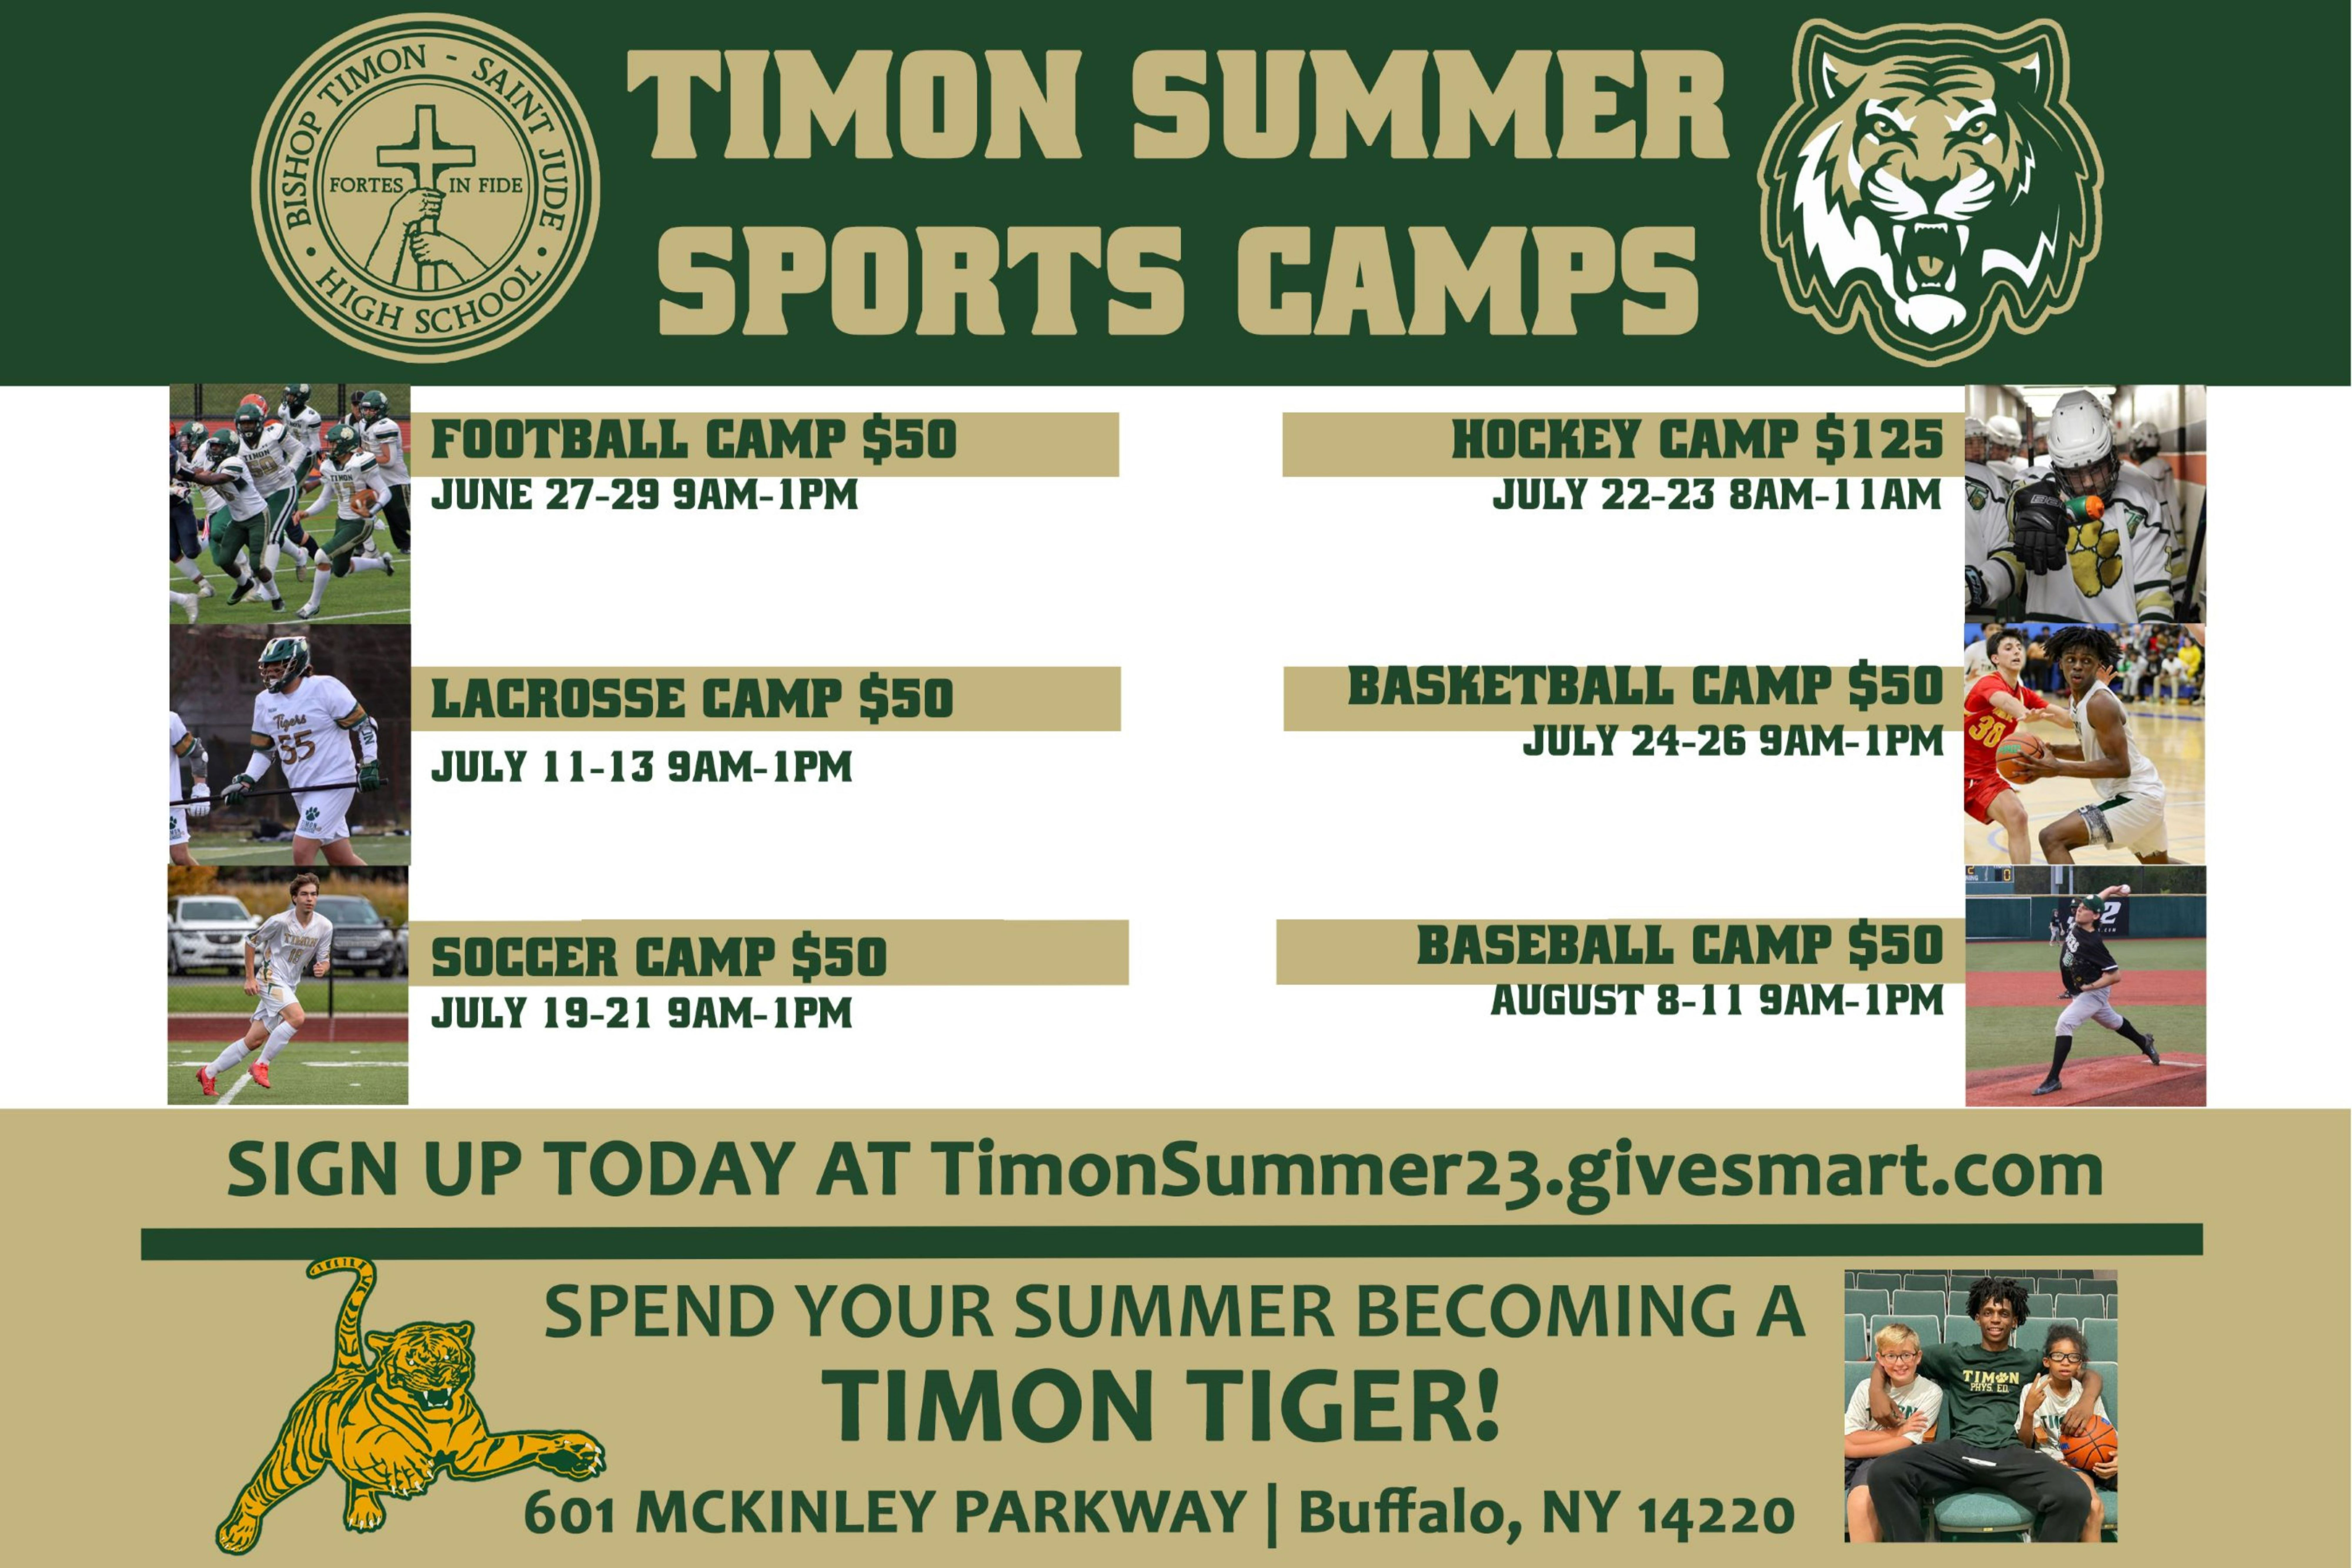 Timon Summer Sports Camps schedule